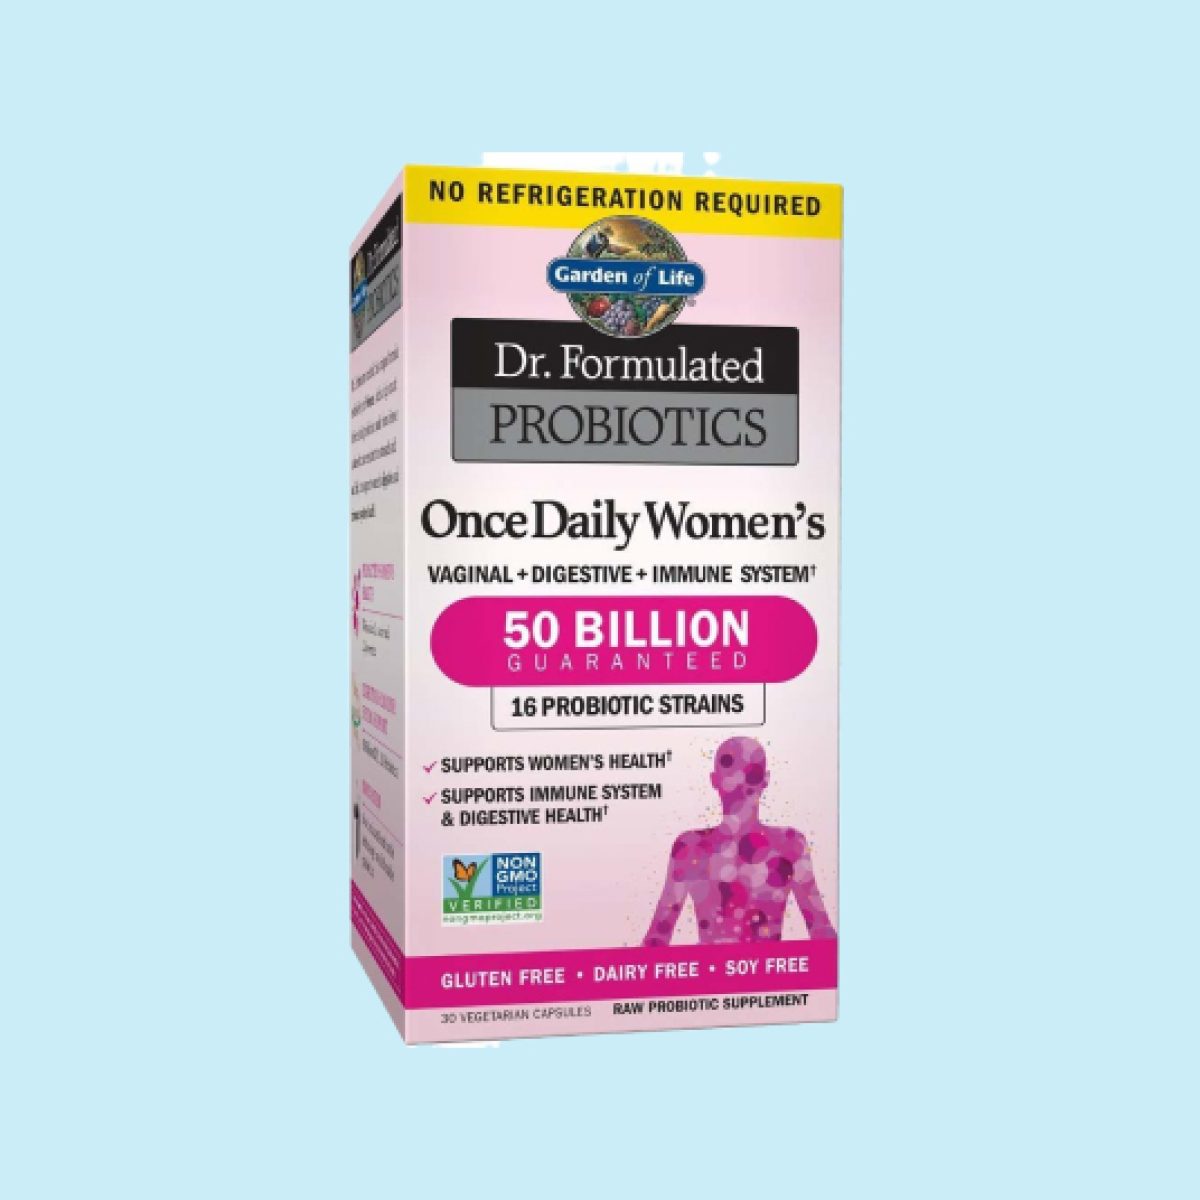 Dr exalted probiotics once daily women's 50 billion.